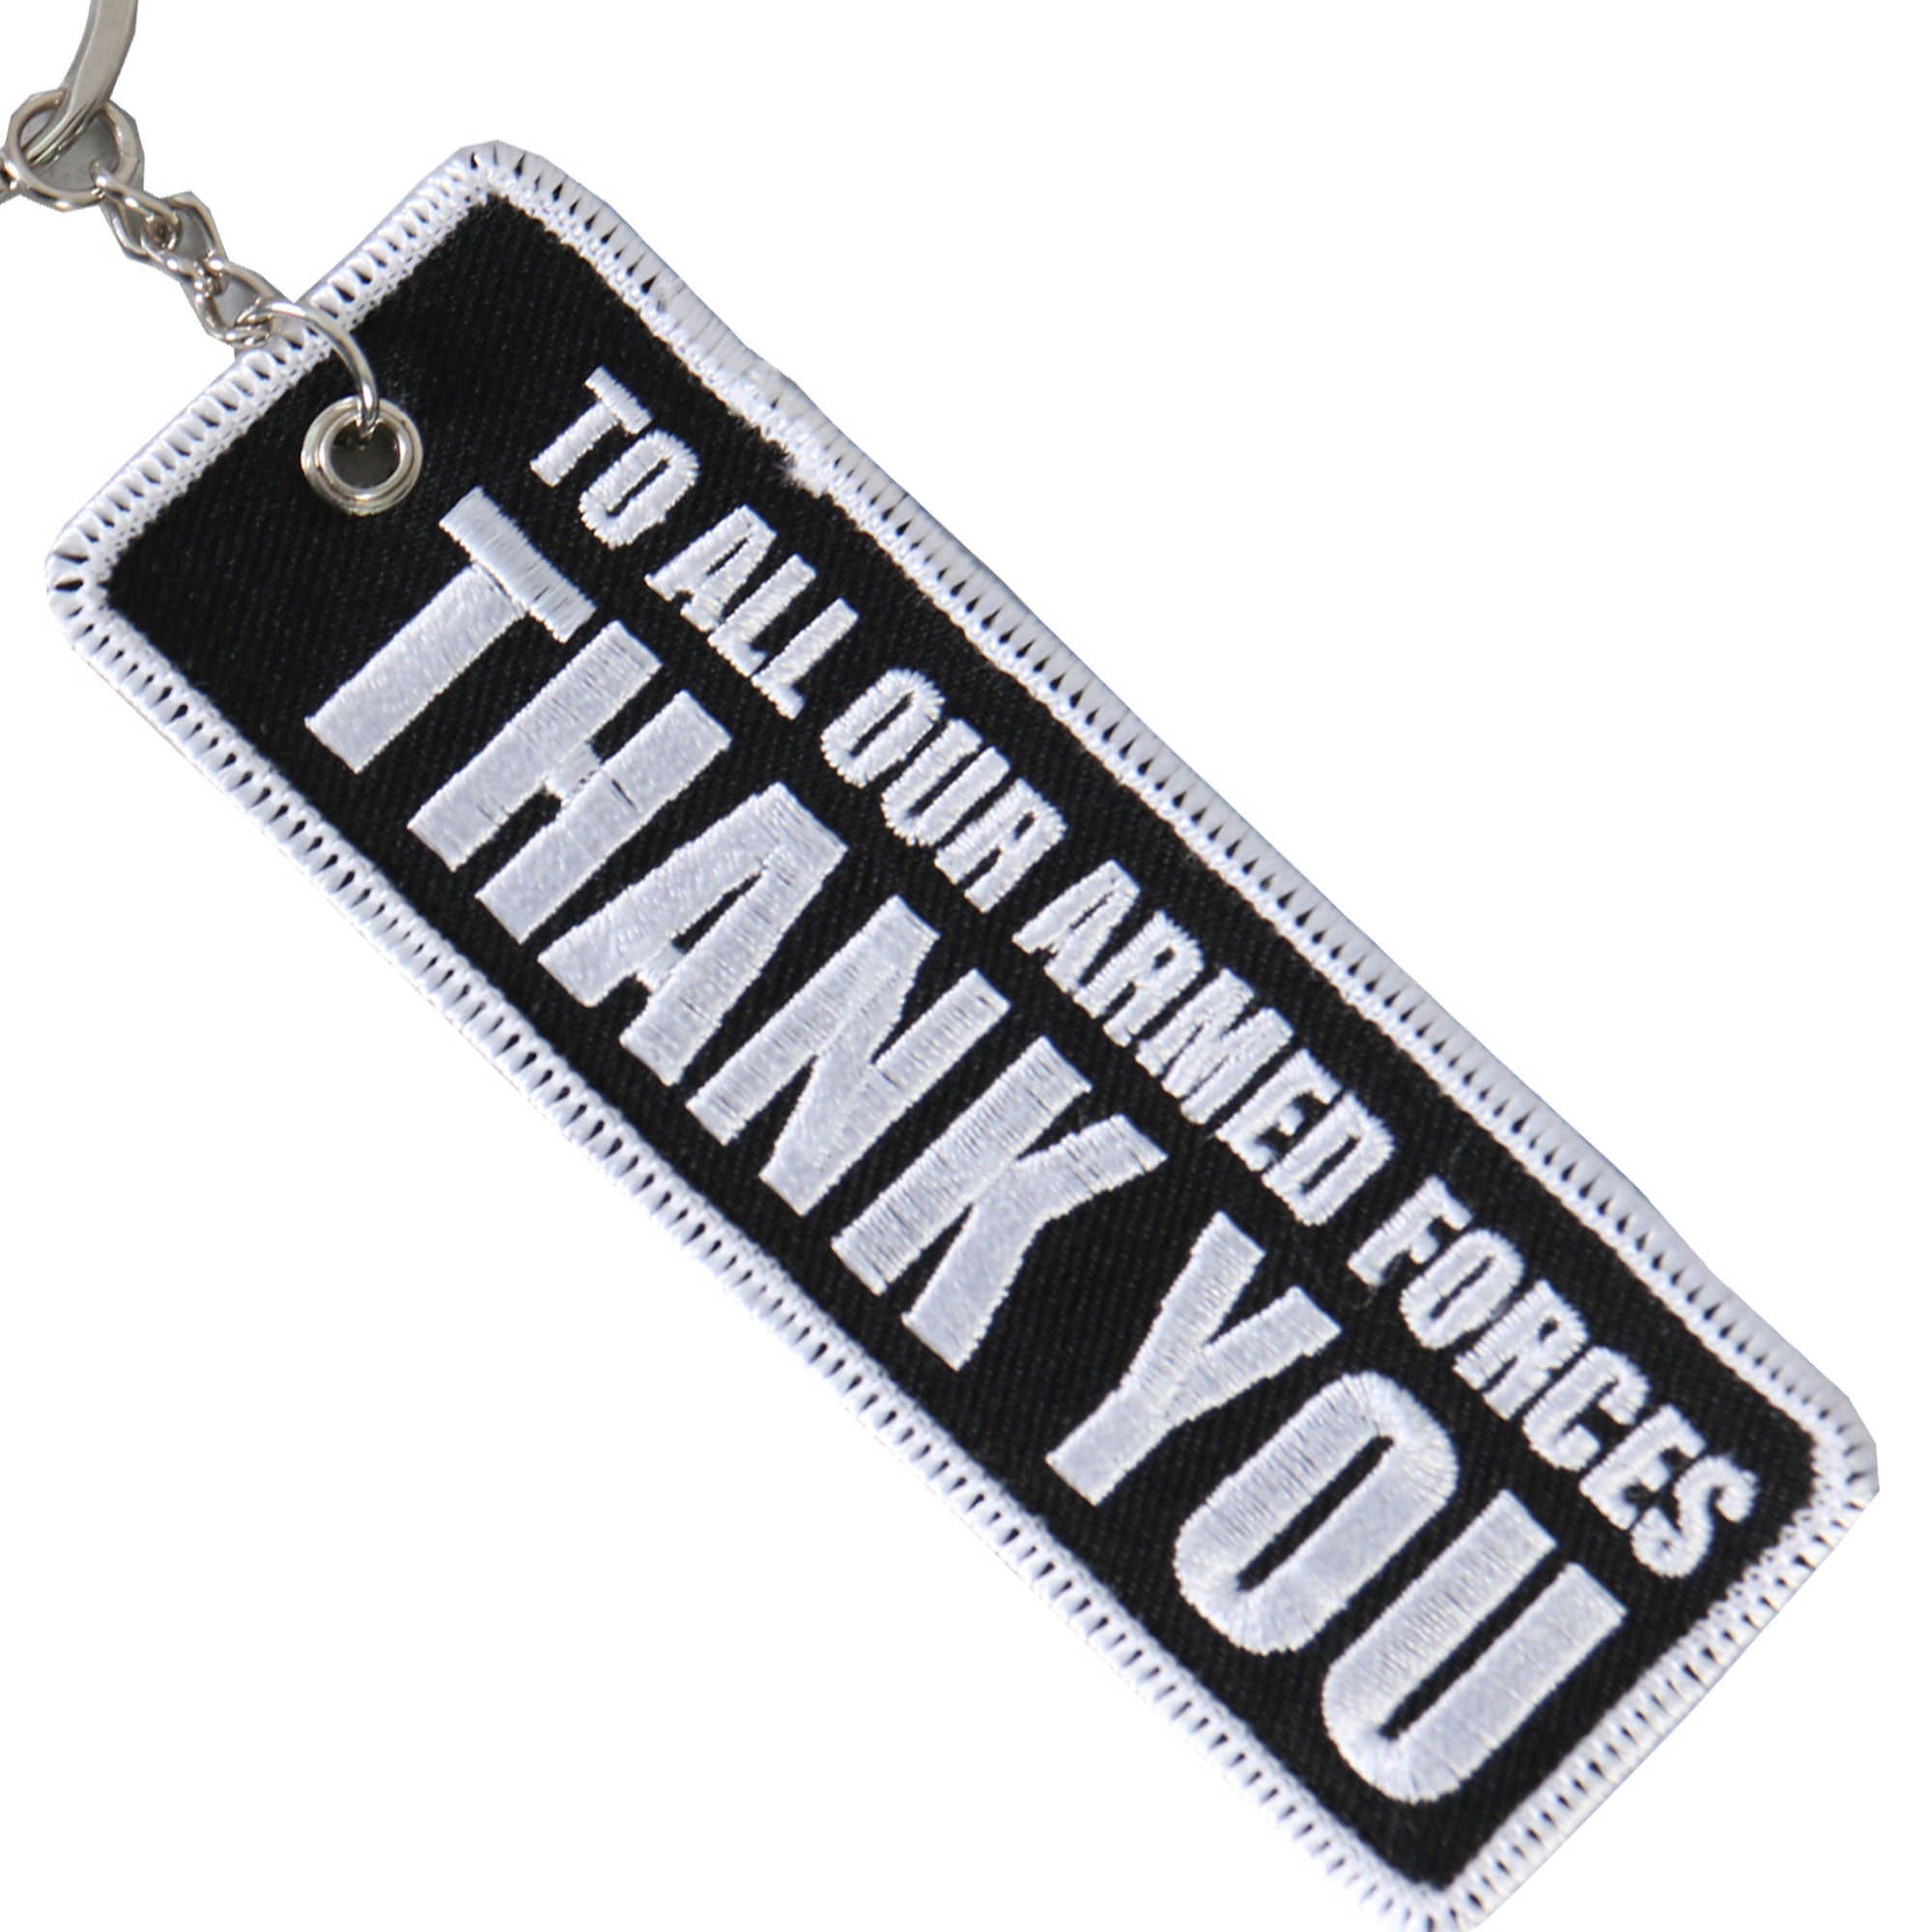 Hot Leathers Too All Our Armed Forces Thank You Embroidered Key Chain